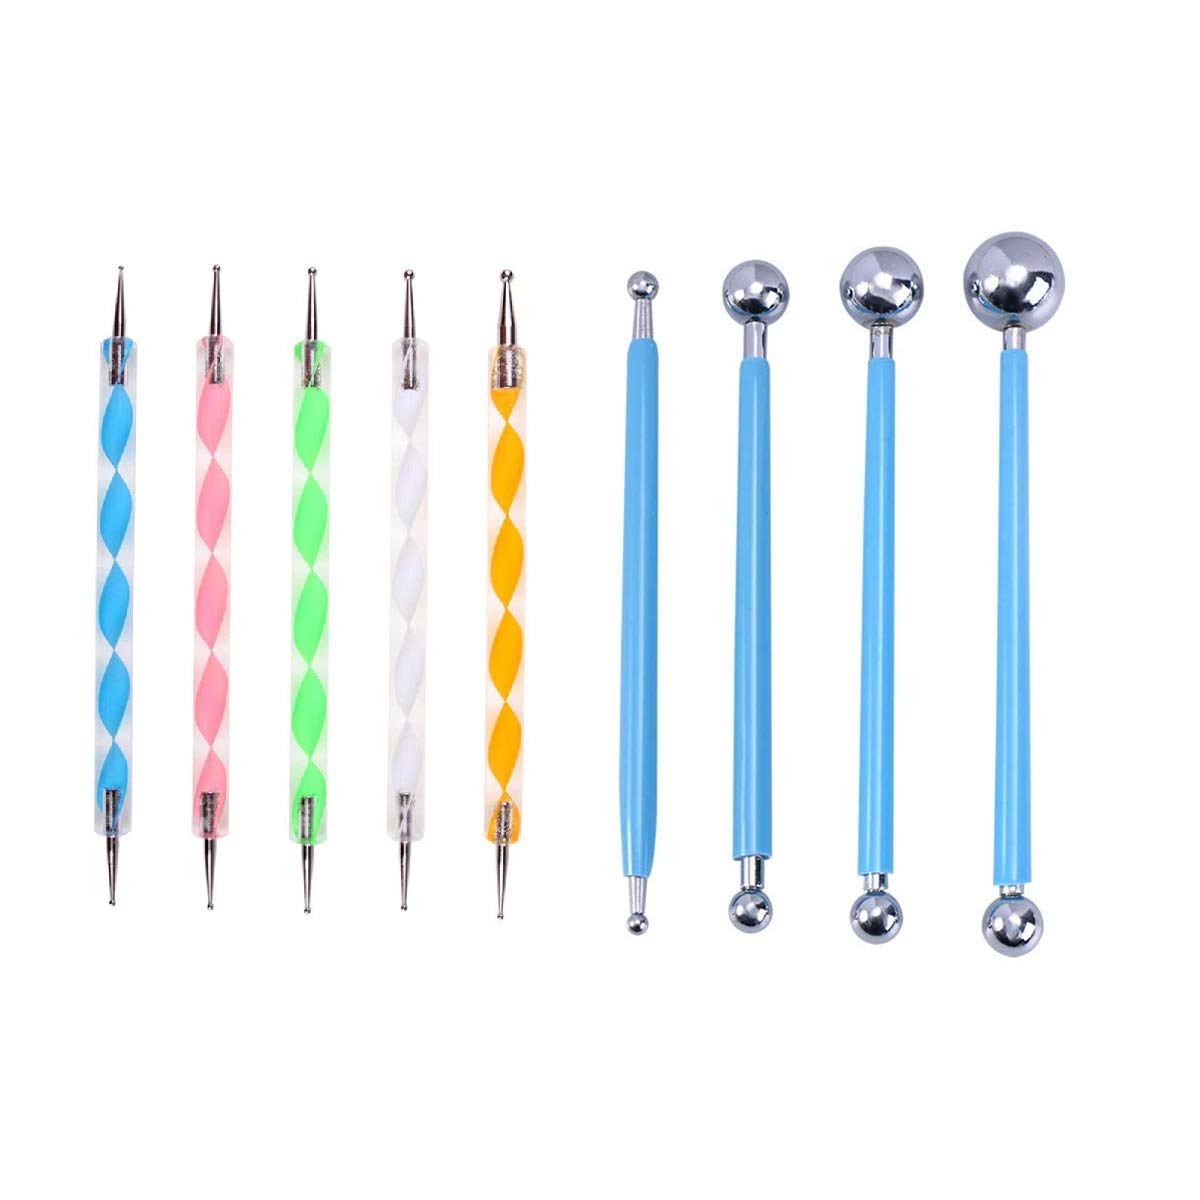 Dotting Tool Set - Paper Bead Rollers